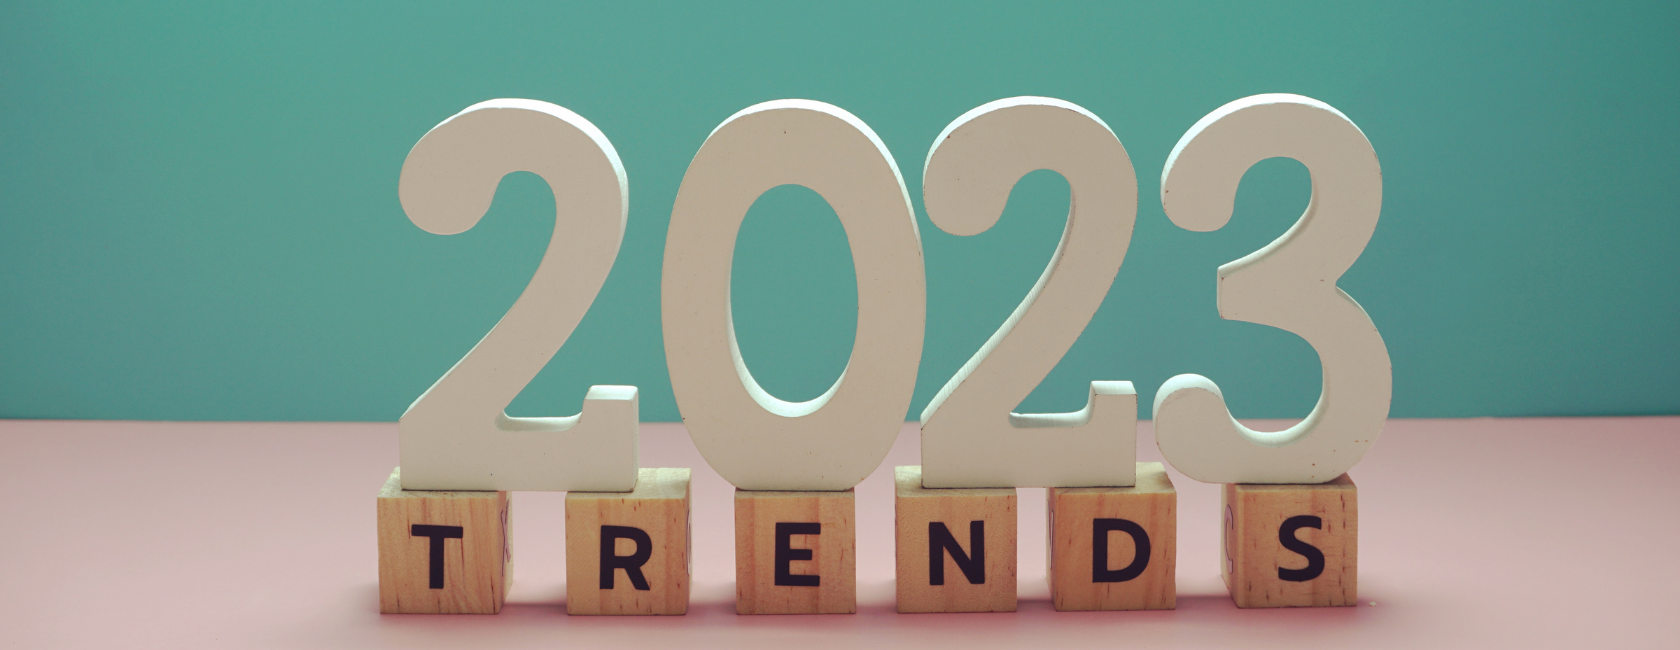 Four top 2023 trends